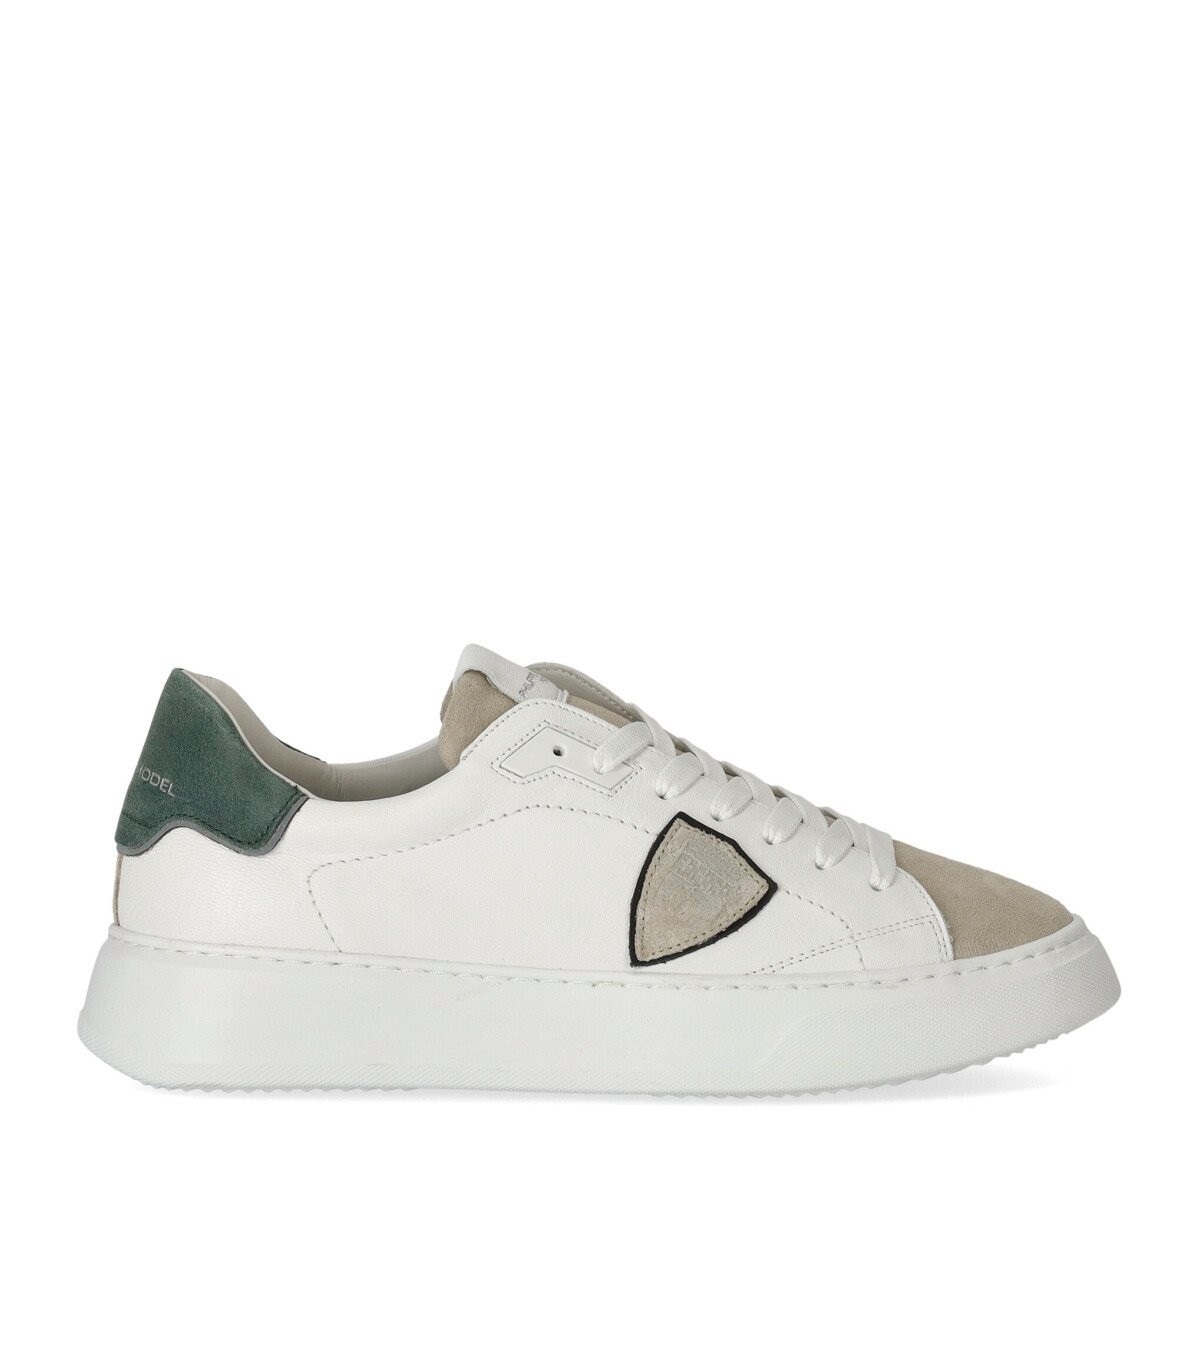 PHILIPPE MODEL TEMPLE LOW WEST WHITE GREEN SNEAKER